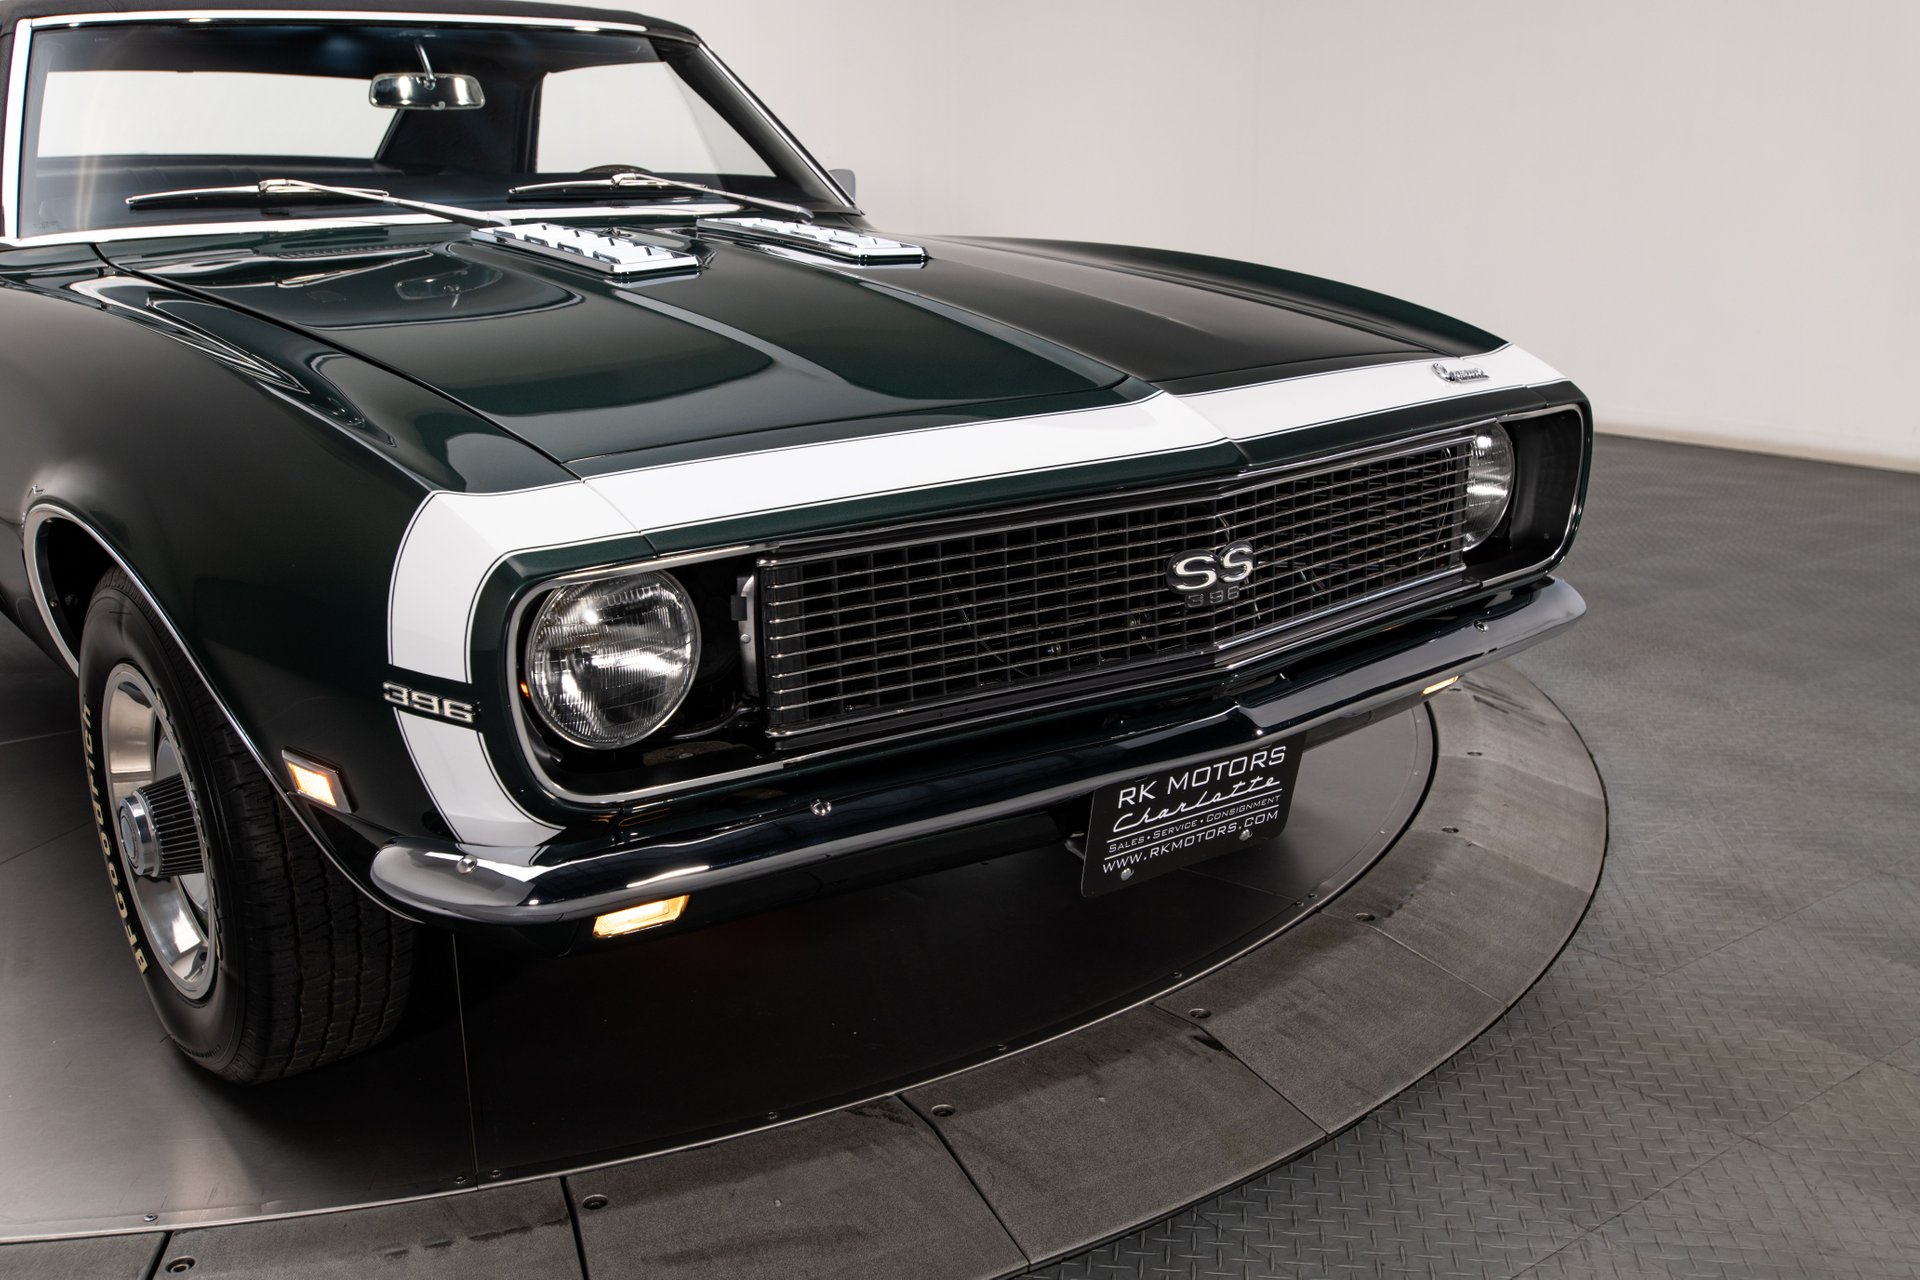 Super sport special: extremely rare L89-optioned '68 Camaro — The